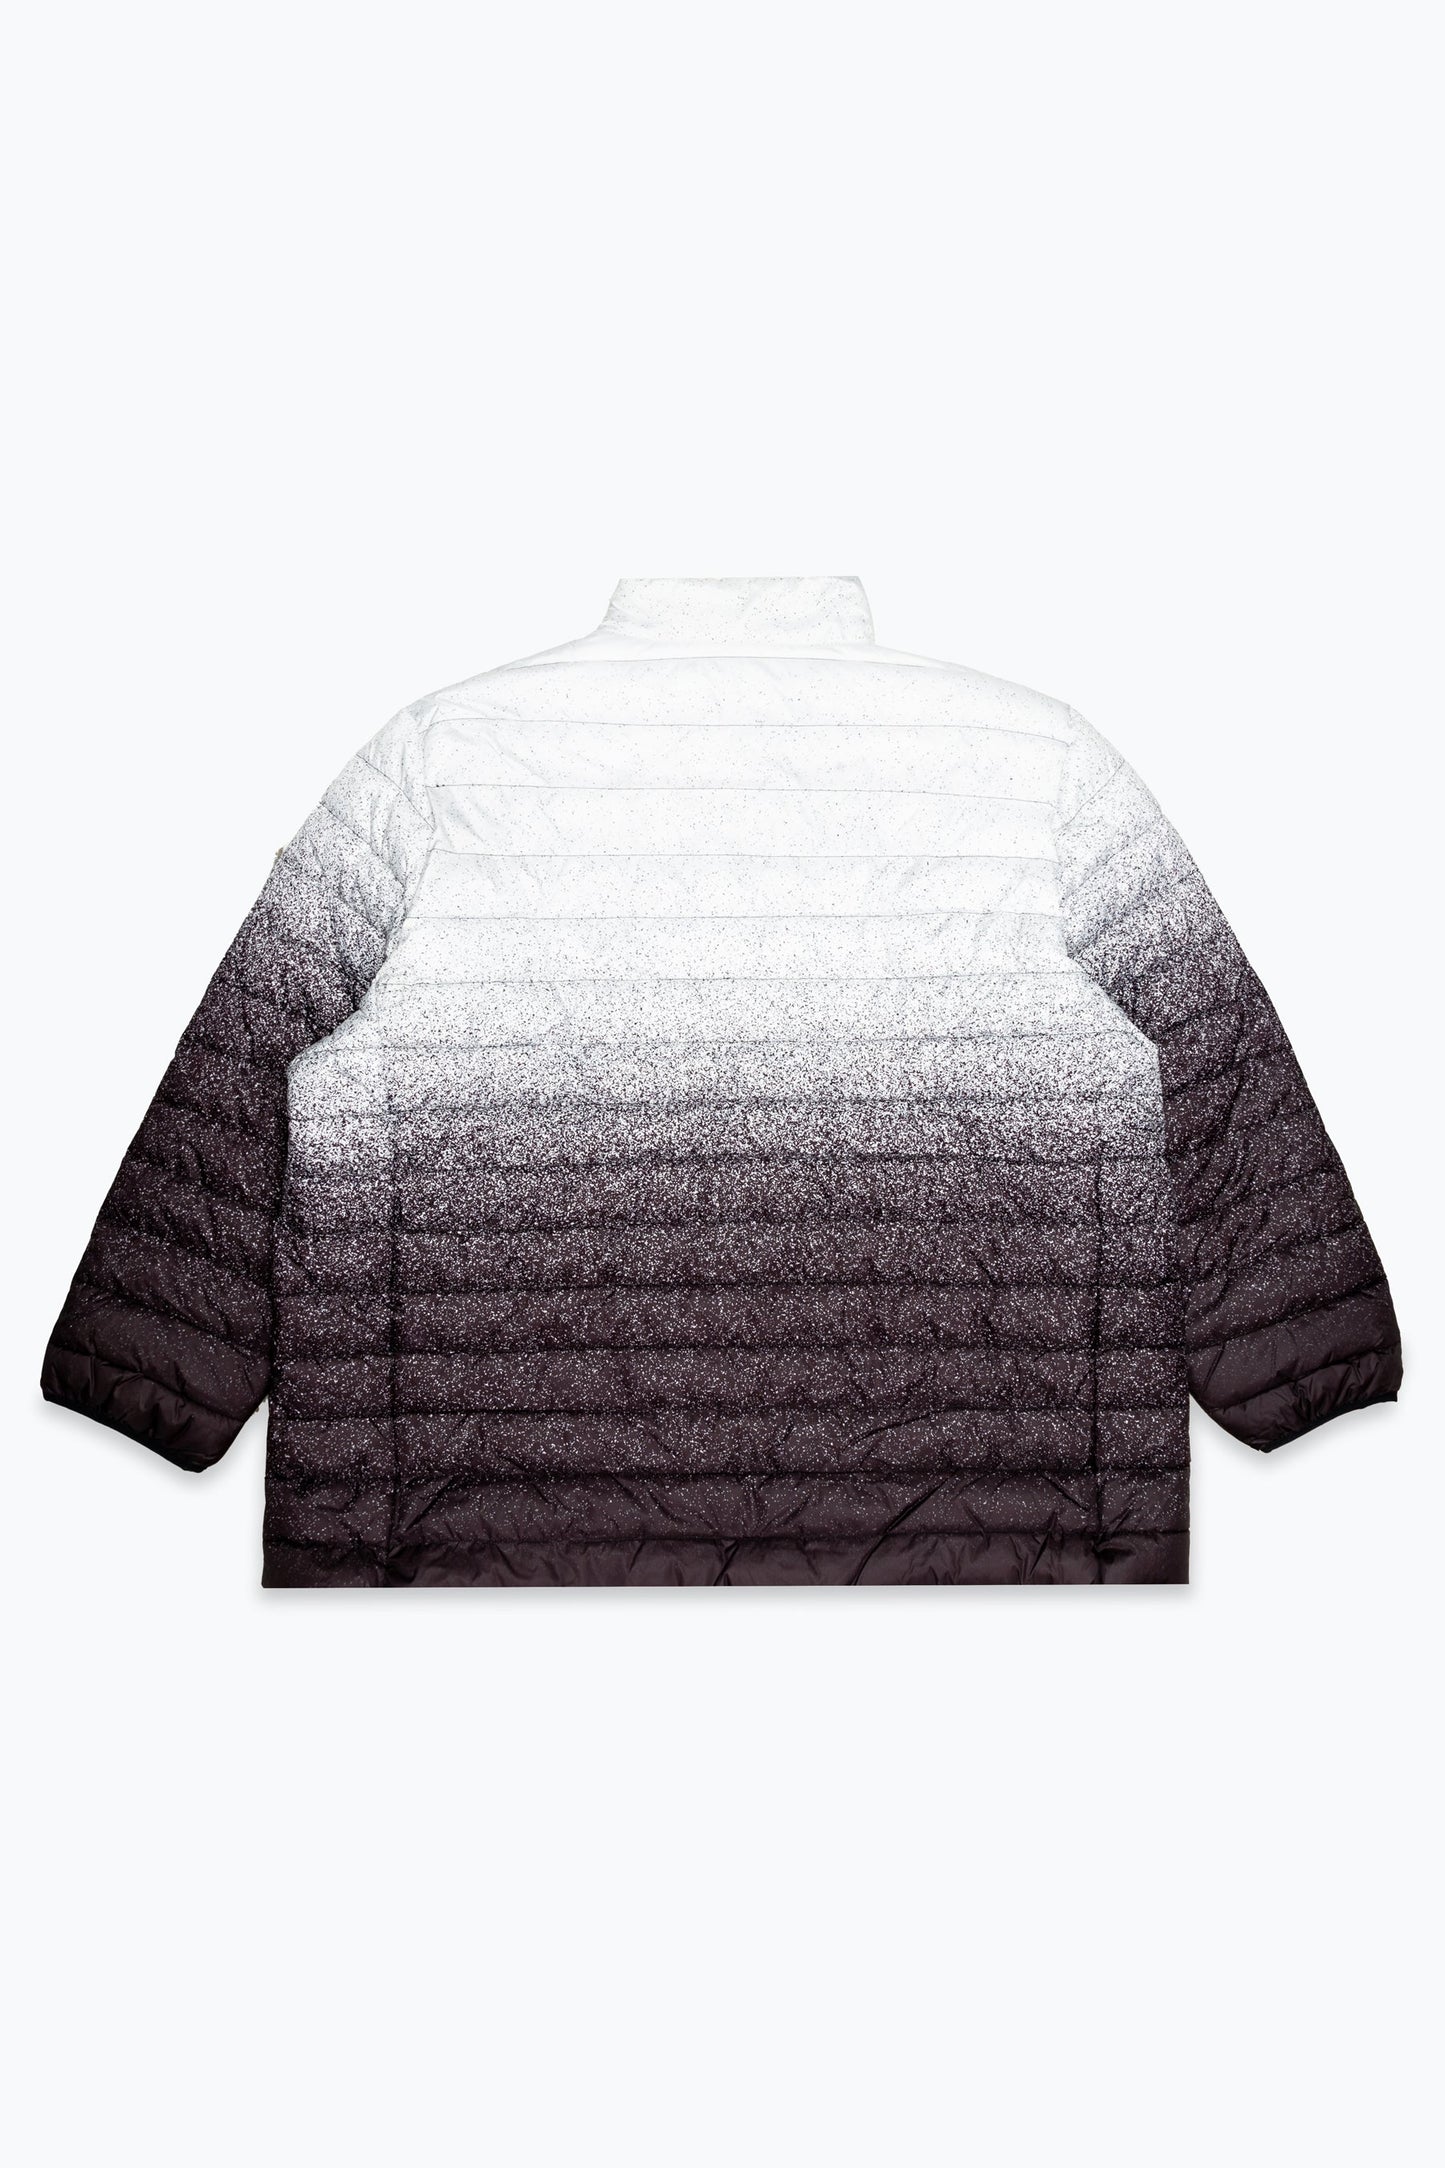 HYPE SPECKLE FADE MENS PUFFER JACKET